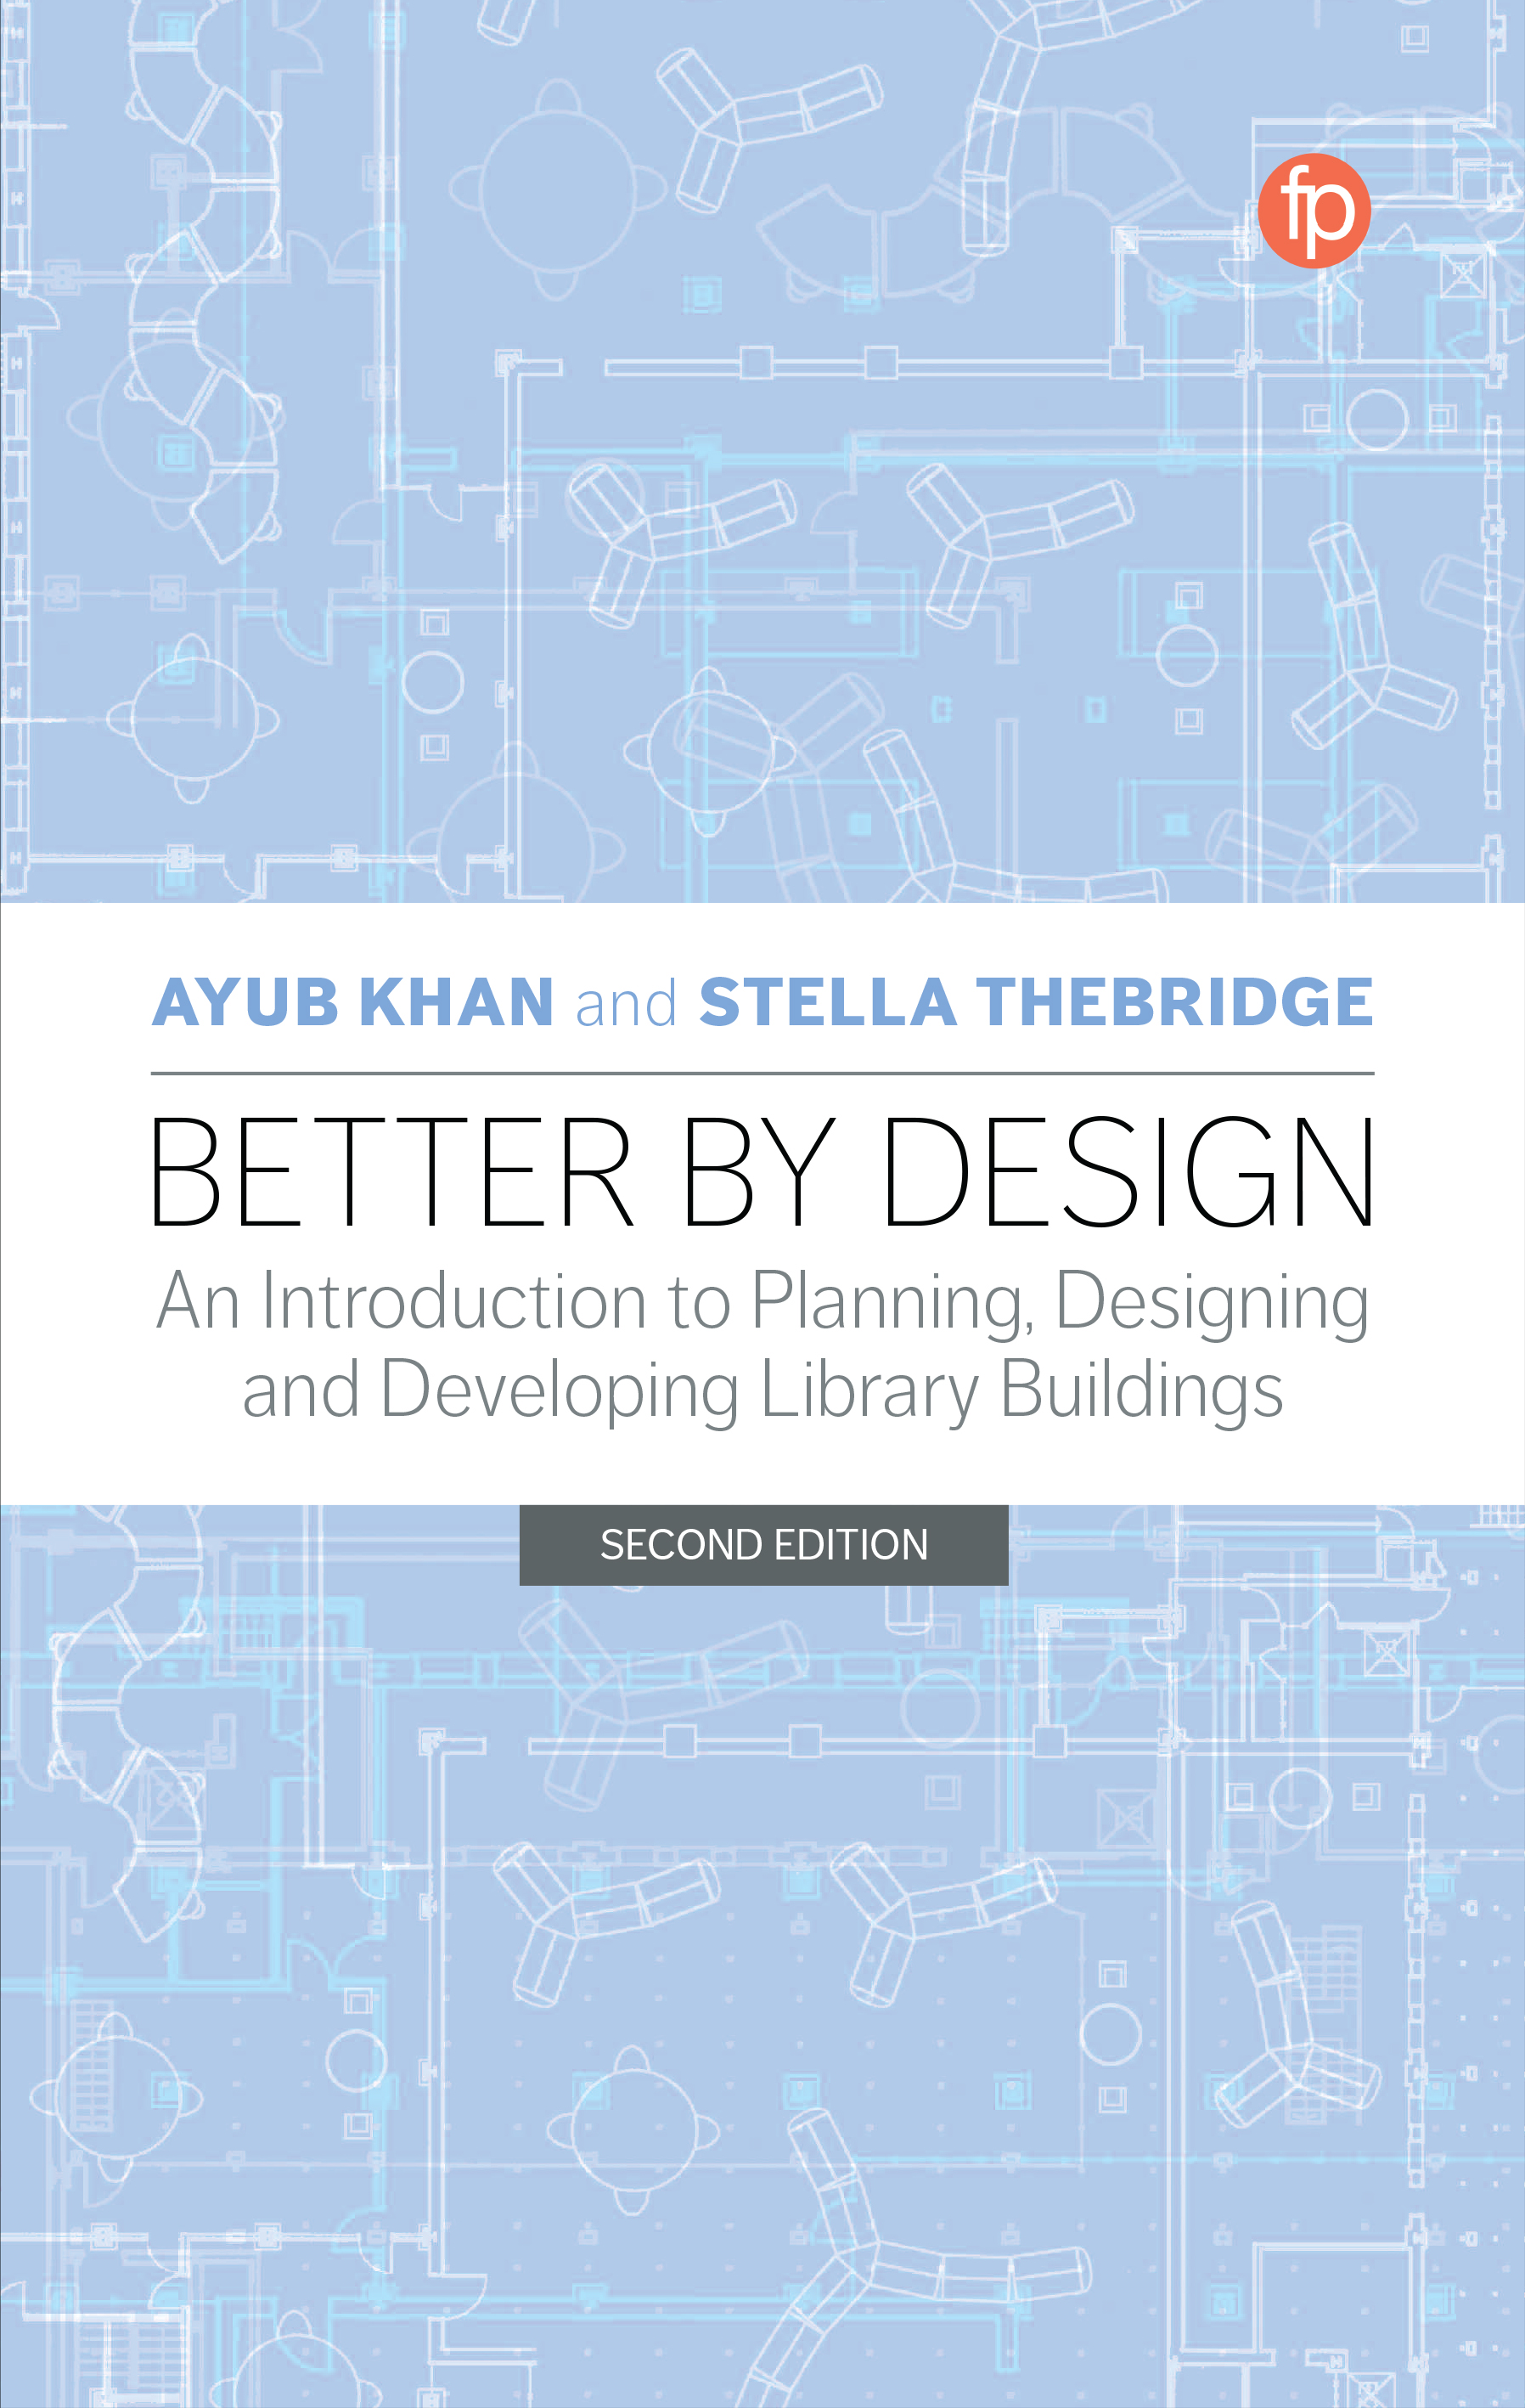 book cover for Better by Design